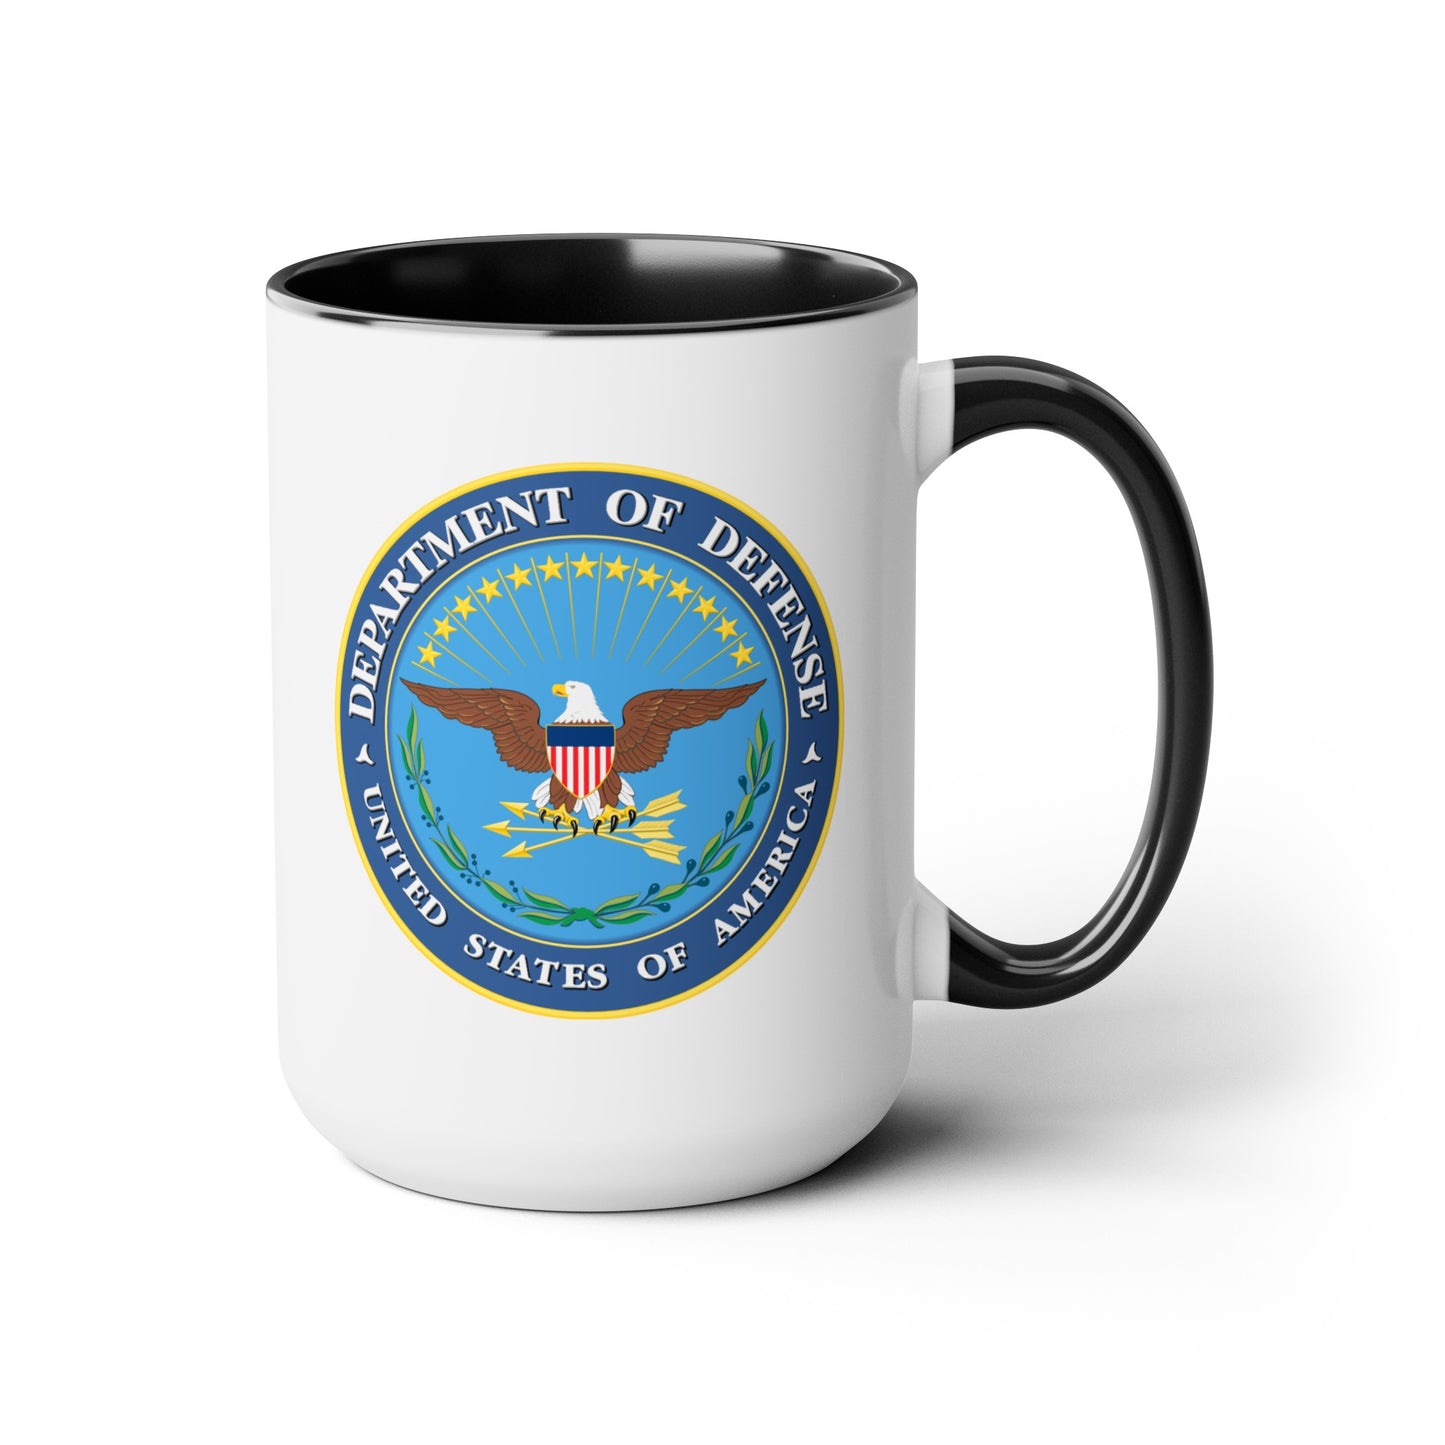 Department of Defense Coffee Mug - Double Sided Black Accent White Ceramic 15oz by TheGlassyLass.com